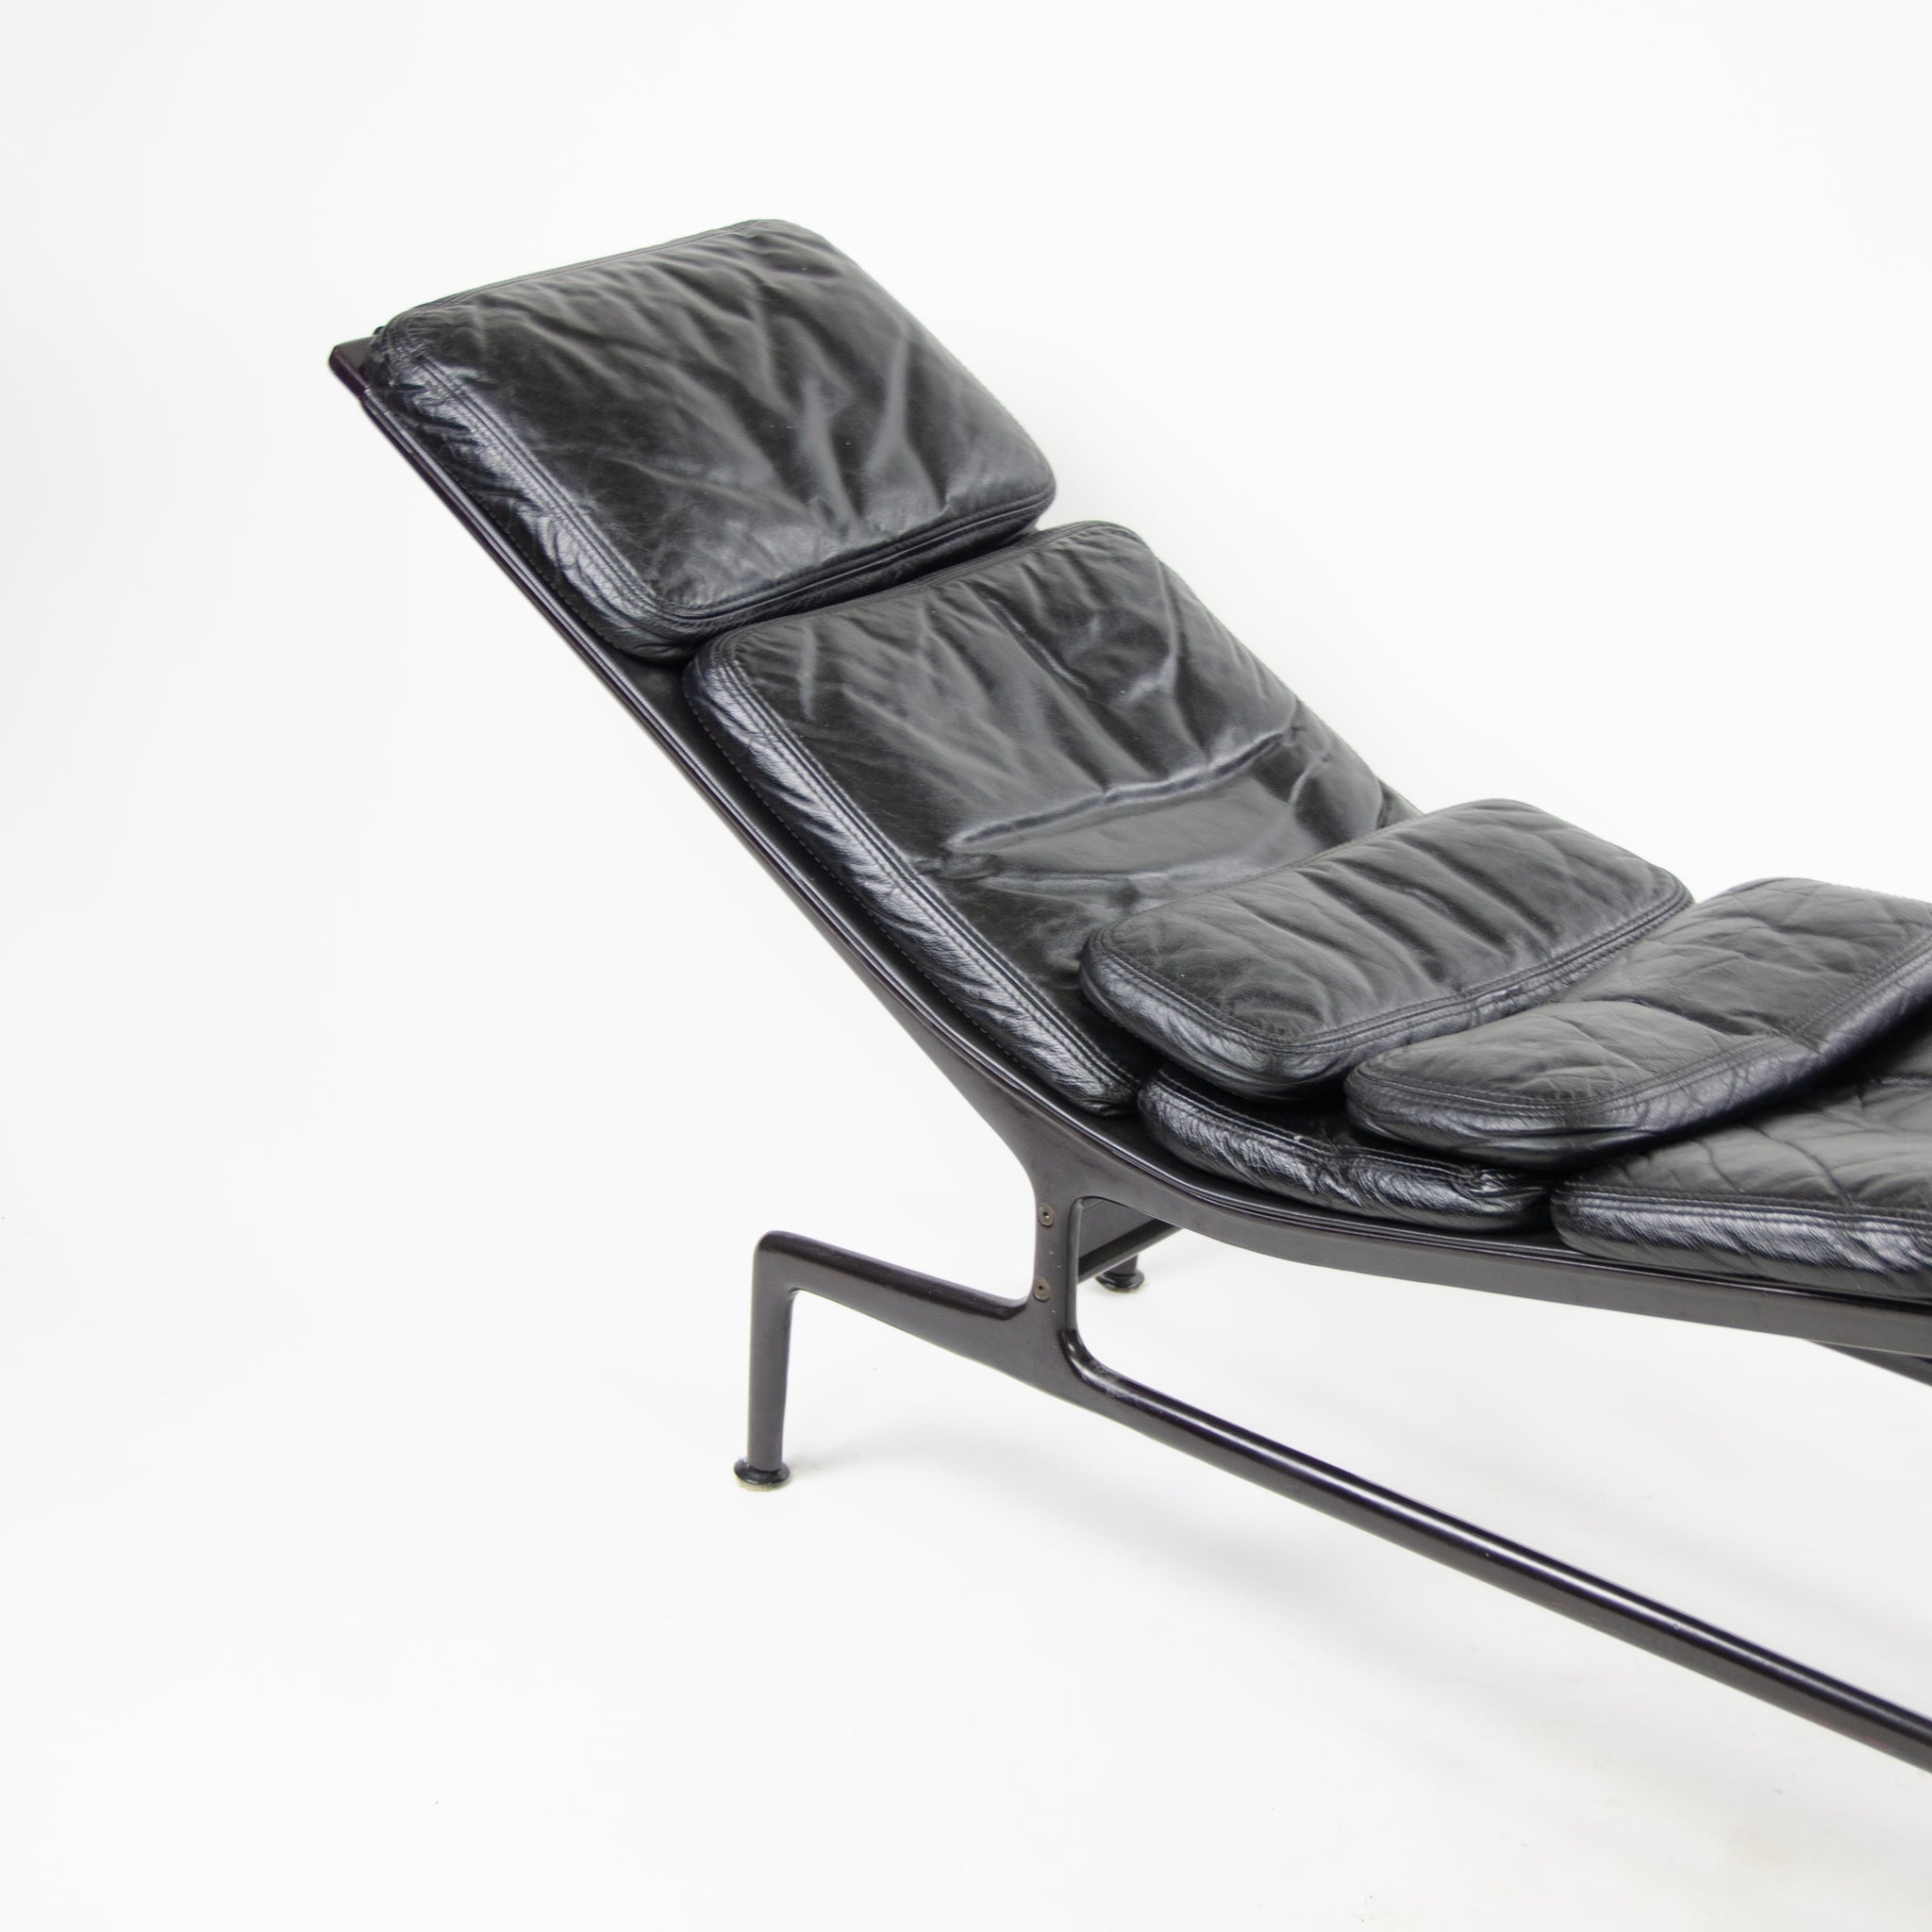 SOLD 1970's Eames Herman Miller Billy Wilder Black and Eggplant Chaise Lounge Chair